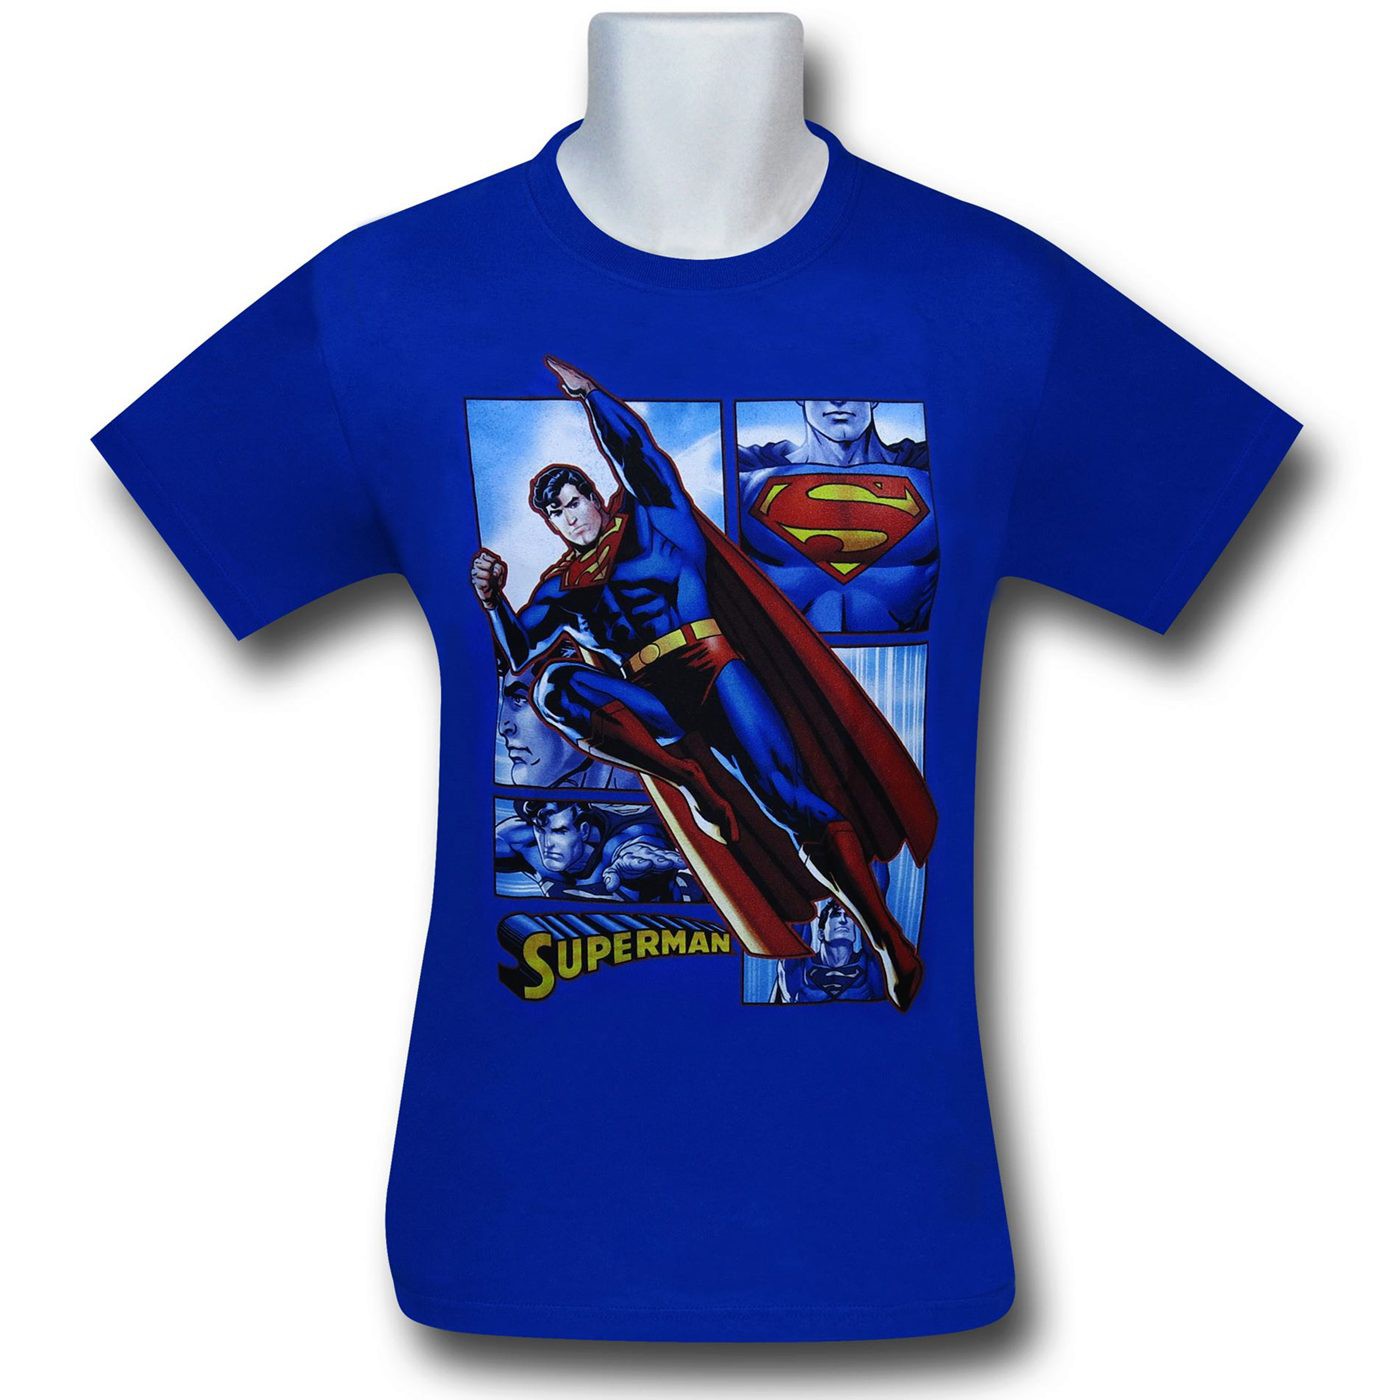 Superman Over Boxes T-Shirt